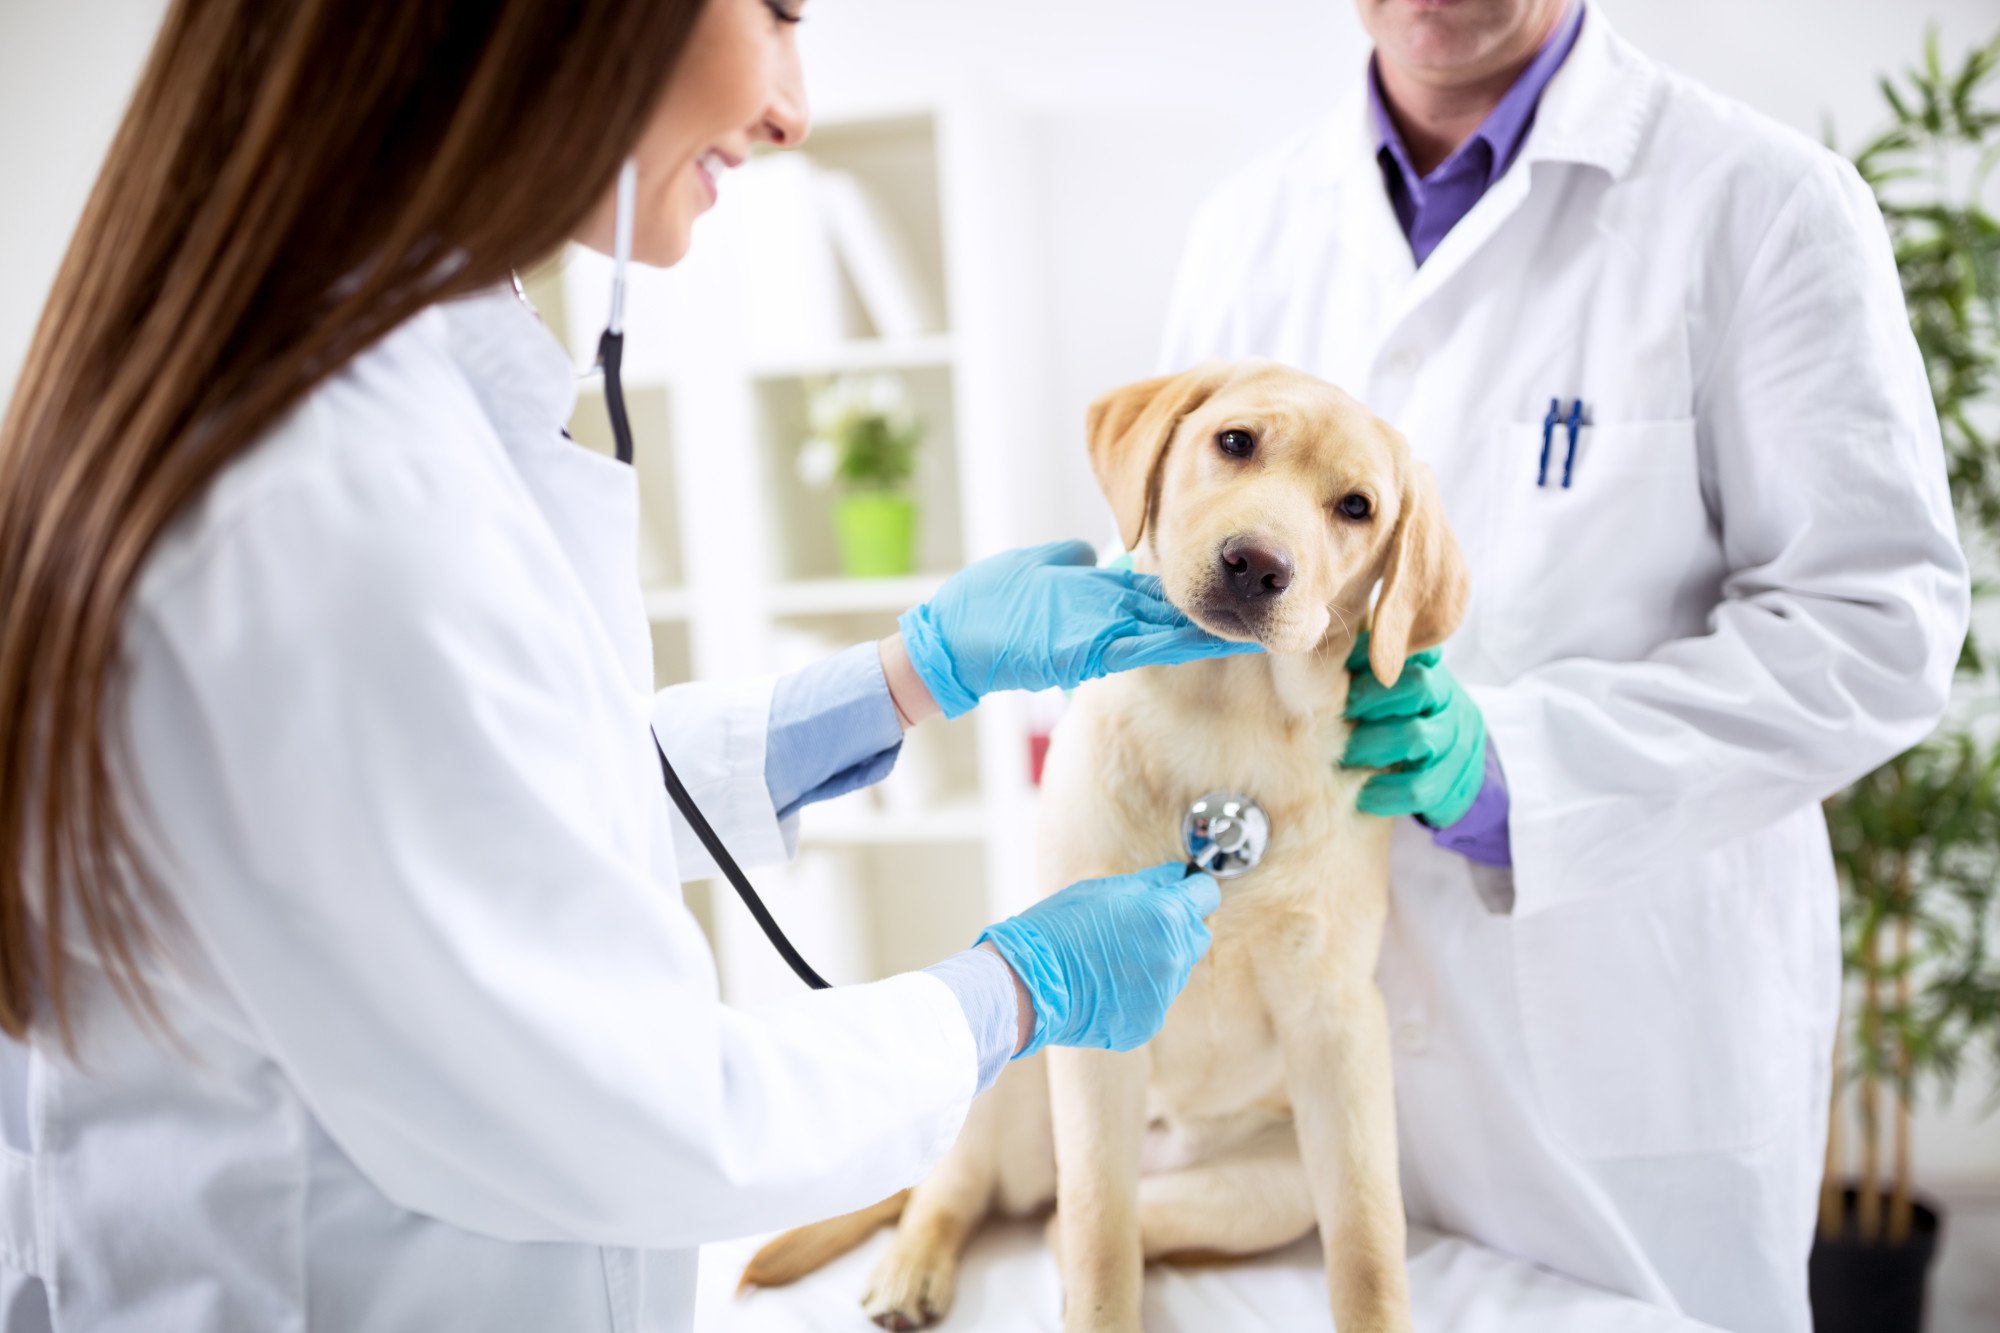 Discover veterinarian indianapolis low cost options for affordable pet care. Learn how affordable veterinary services benefit pets and families.